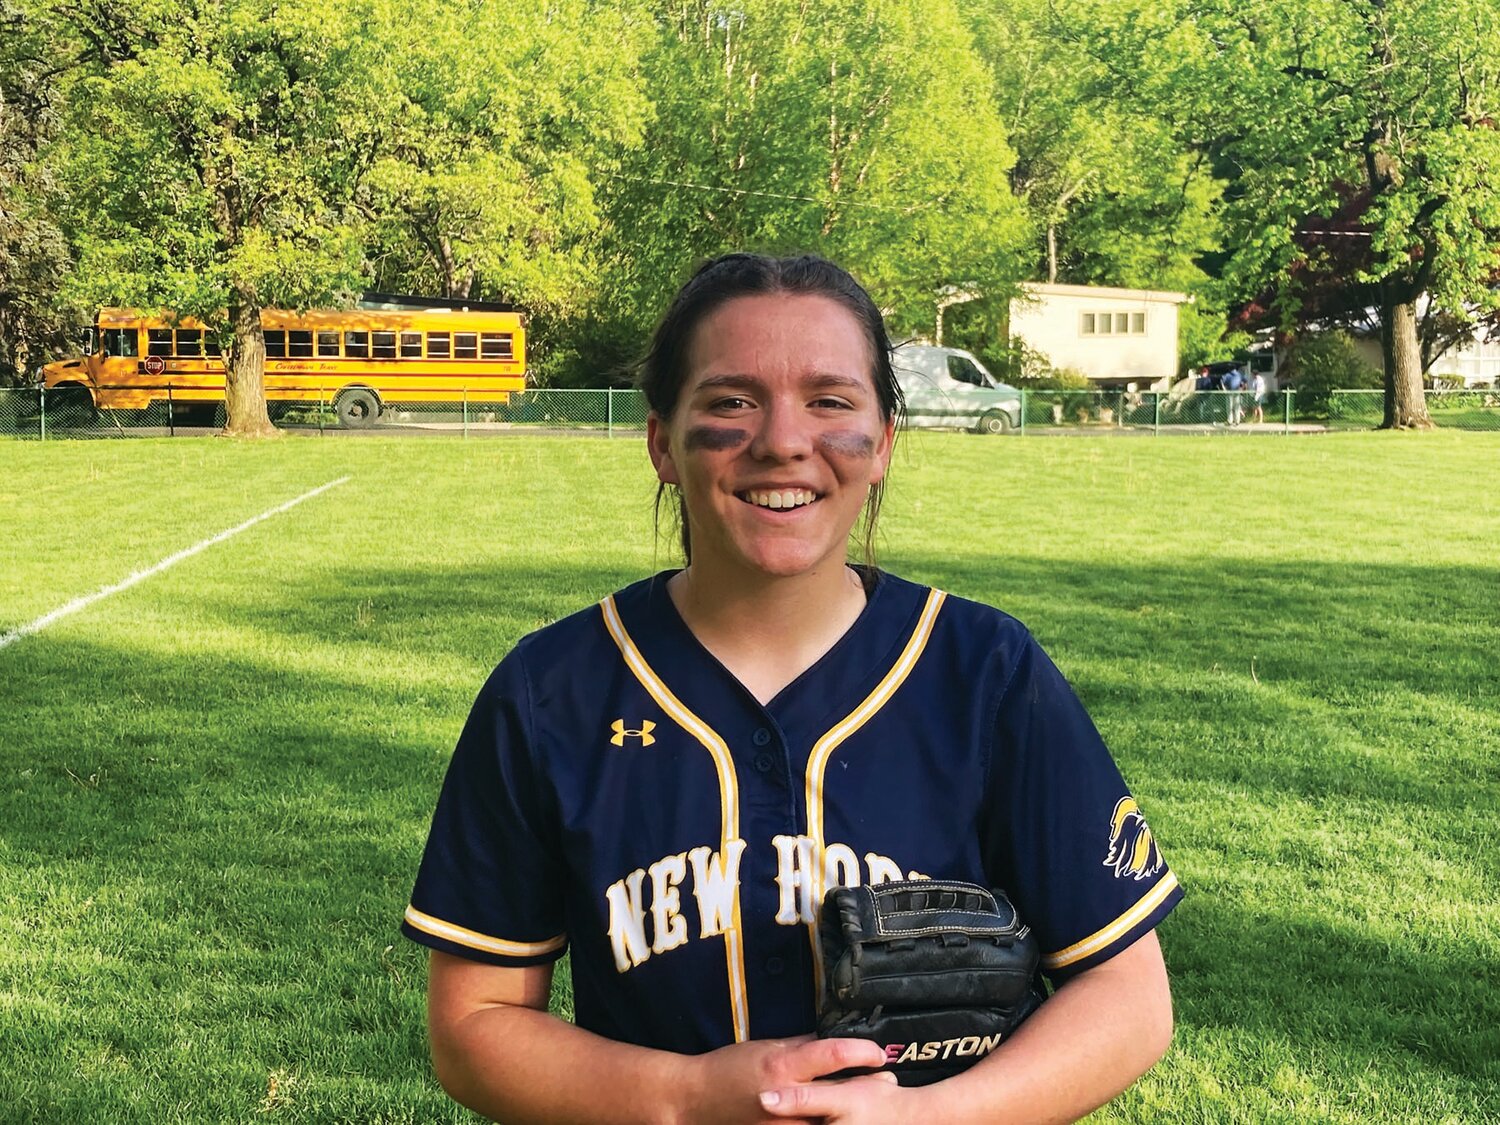 New Hope-Solebury’s Emily Wilson pitched a complete game in a 12-10 win over Cheltenham.